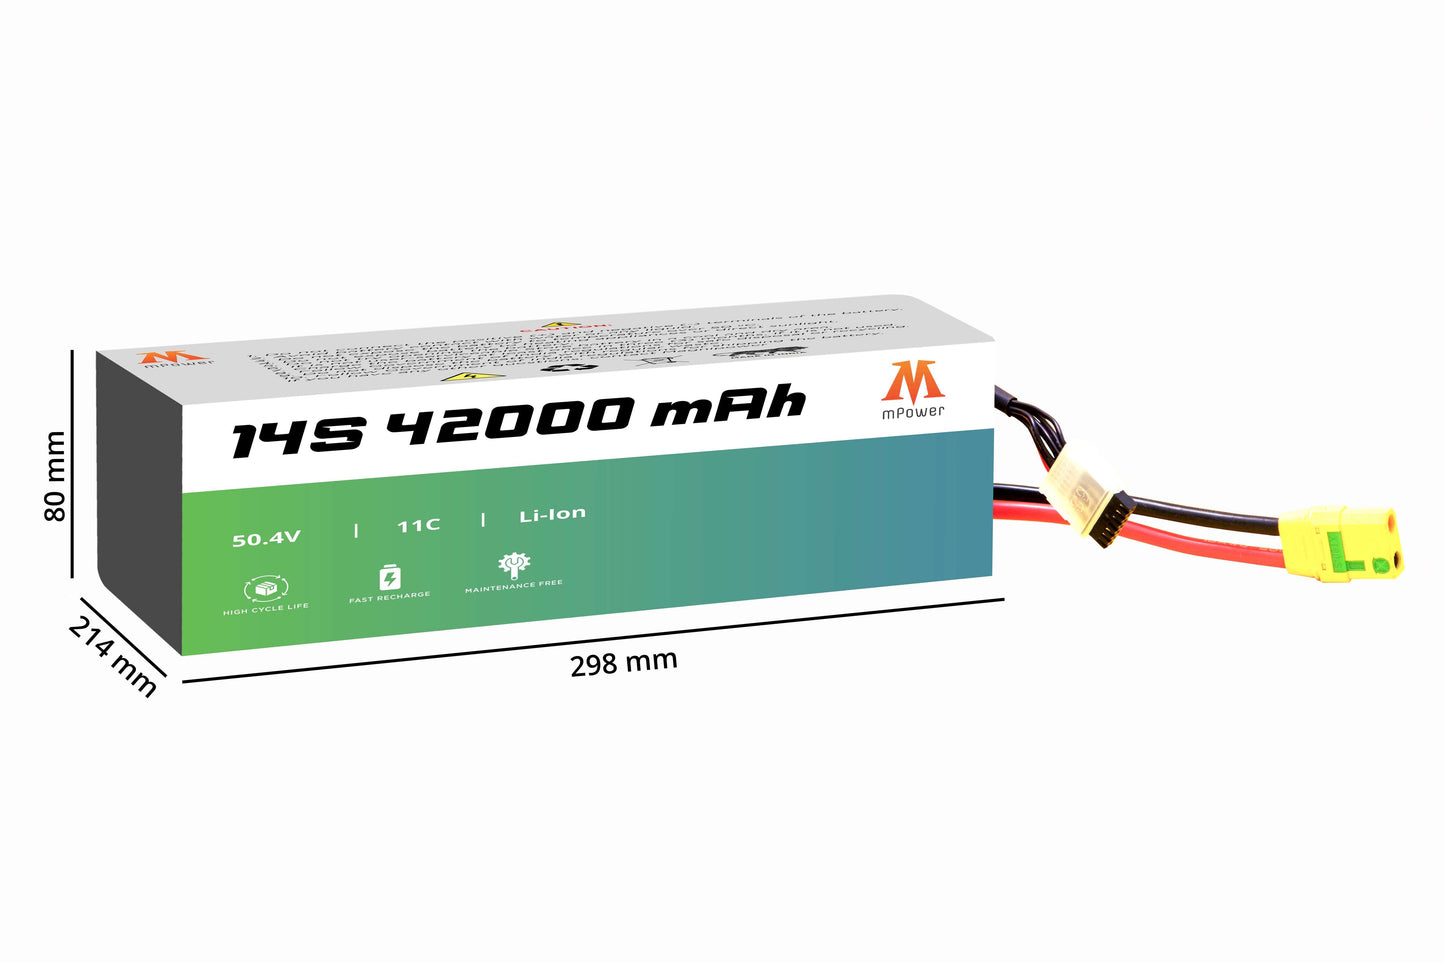 mPower 14S 42000mAh Lithium-Ion Battery for Survey Drones